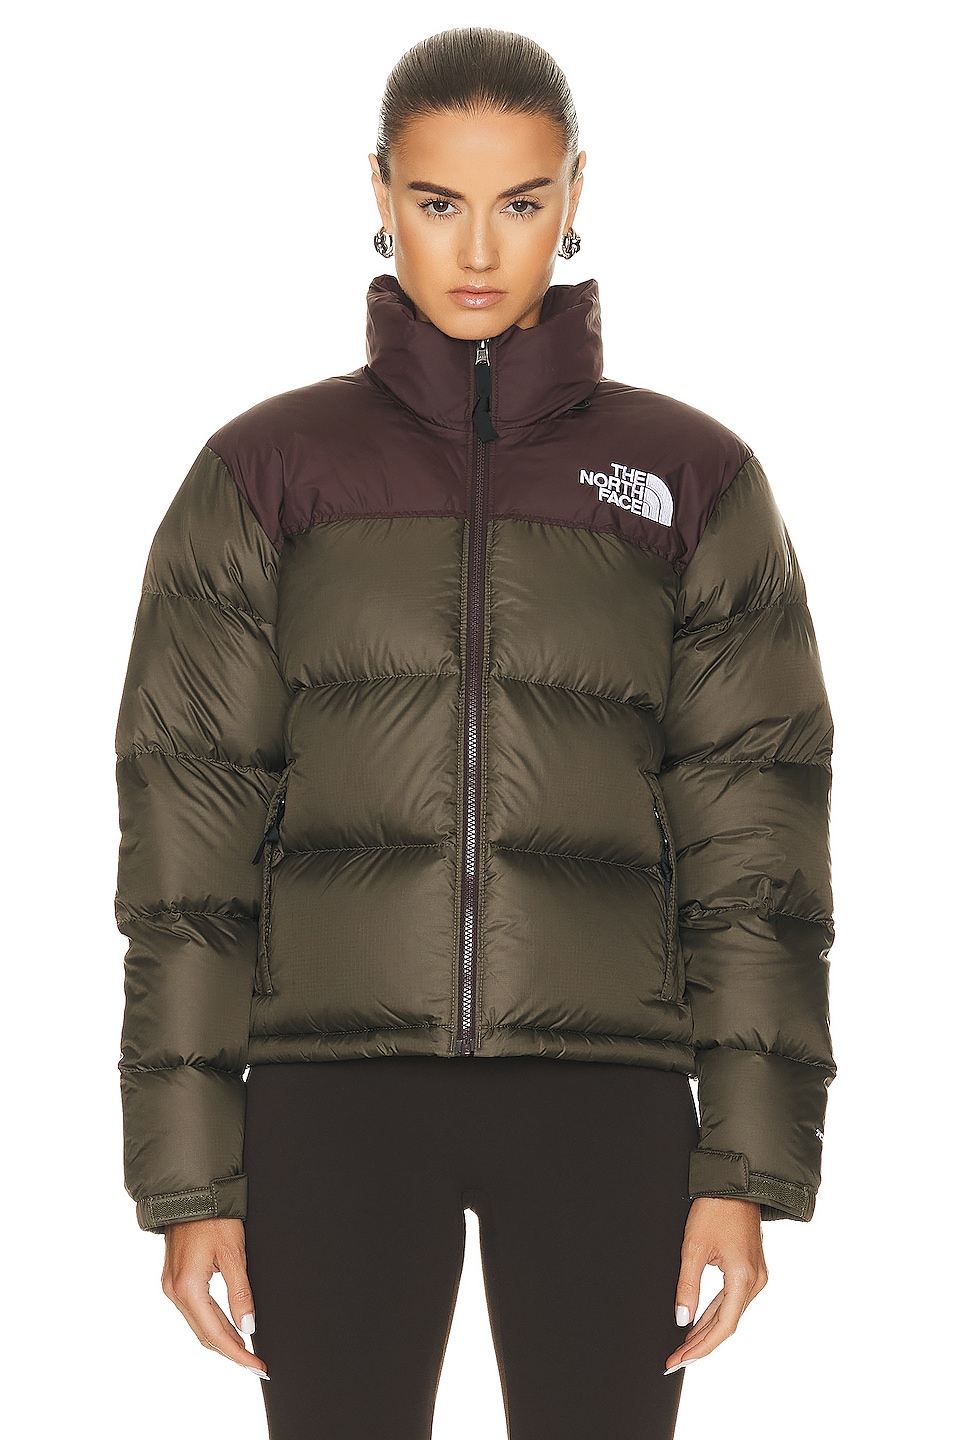 Image 1 of The North Face 1996 Retro Nuptse Jacket in New Taupe Green & Coal Brown